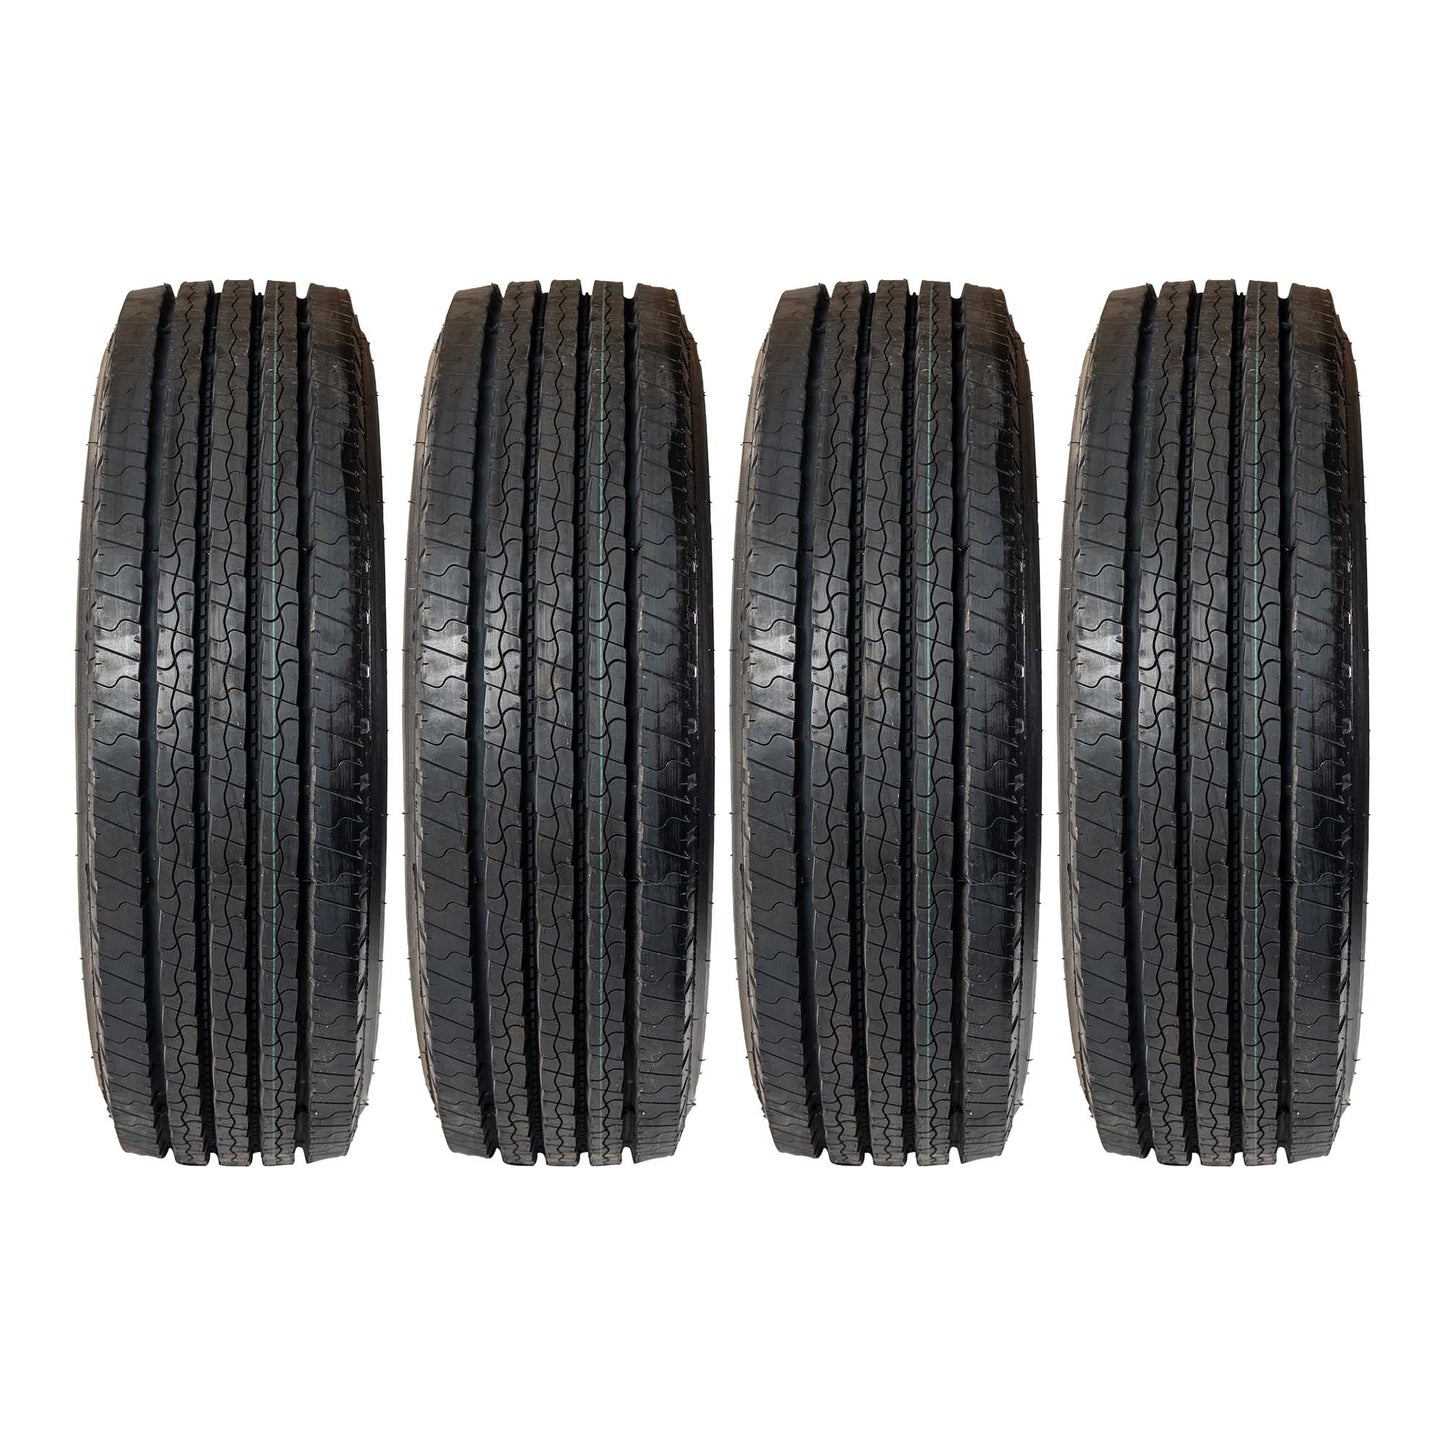 Taskmaster 235/75R17.5 18 Ply Trailer Tire - The Trailer Parts Outlet